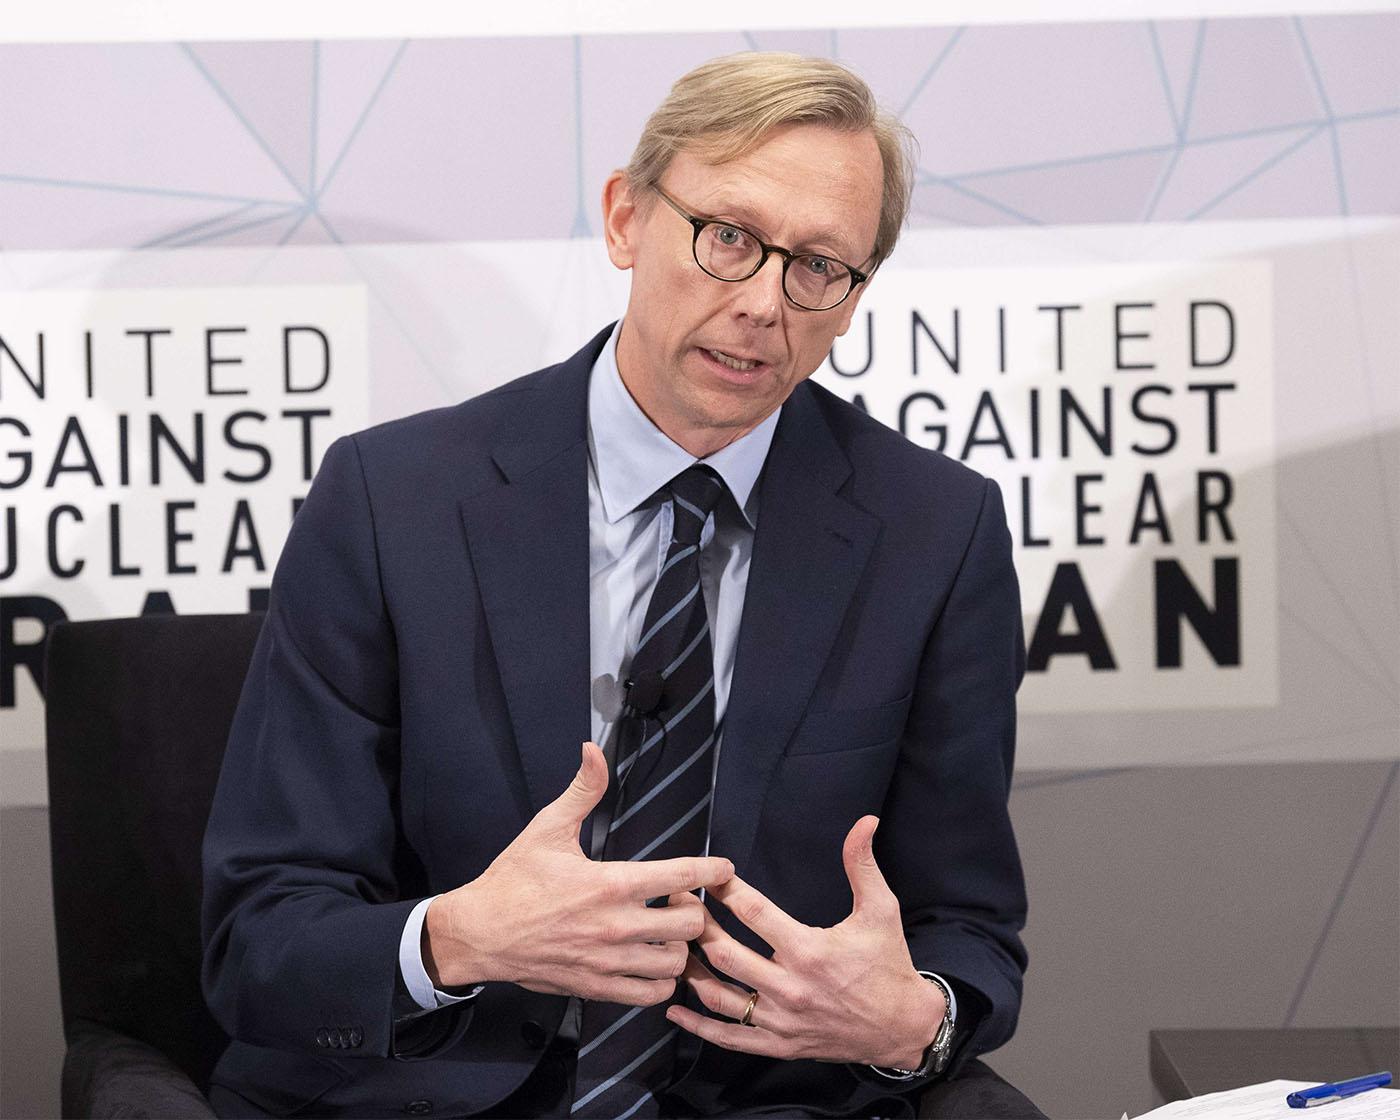 Brian Hook, the State Department's special representative on Iran policy